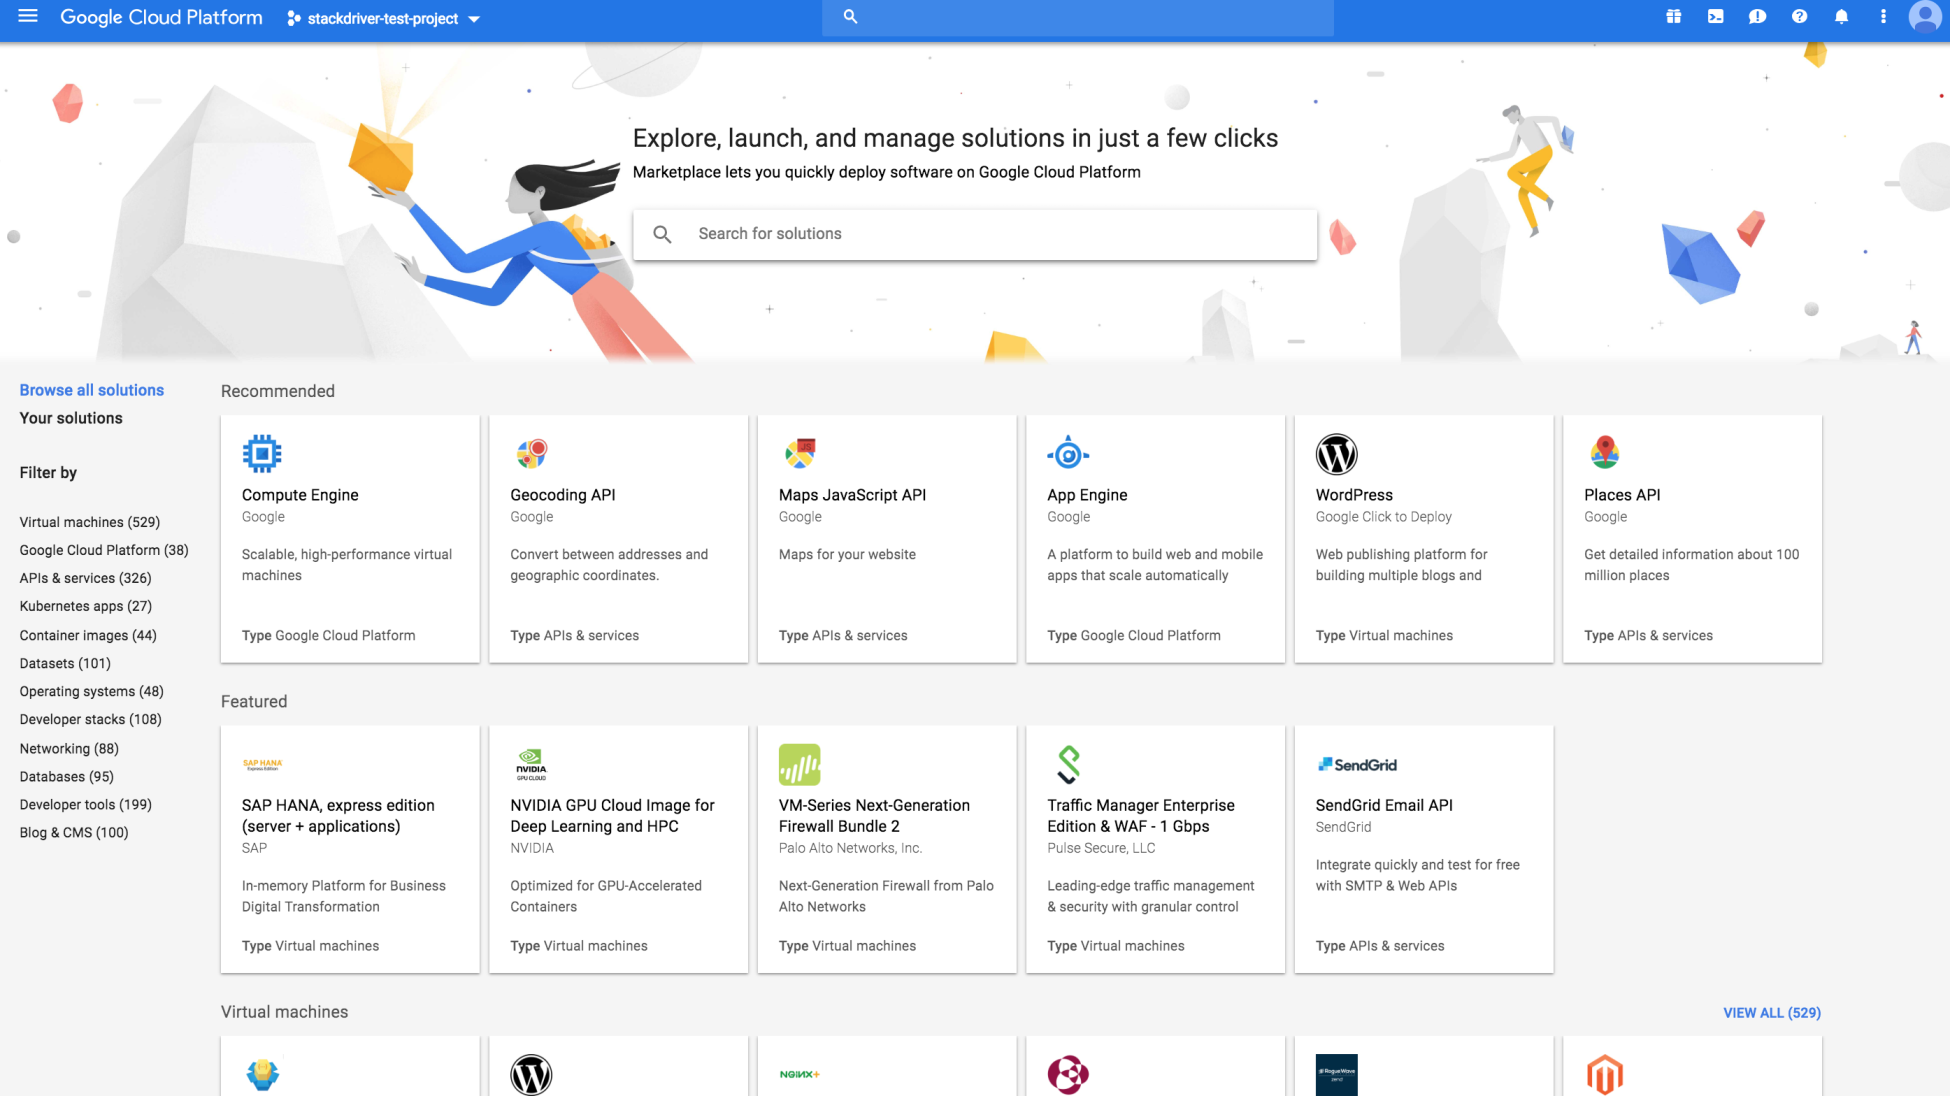 Google Play Game Services – Marketplace – Google Cloud console